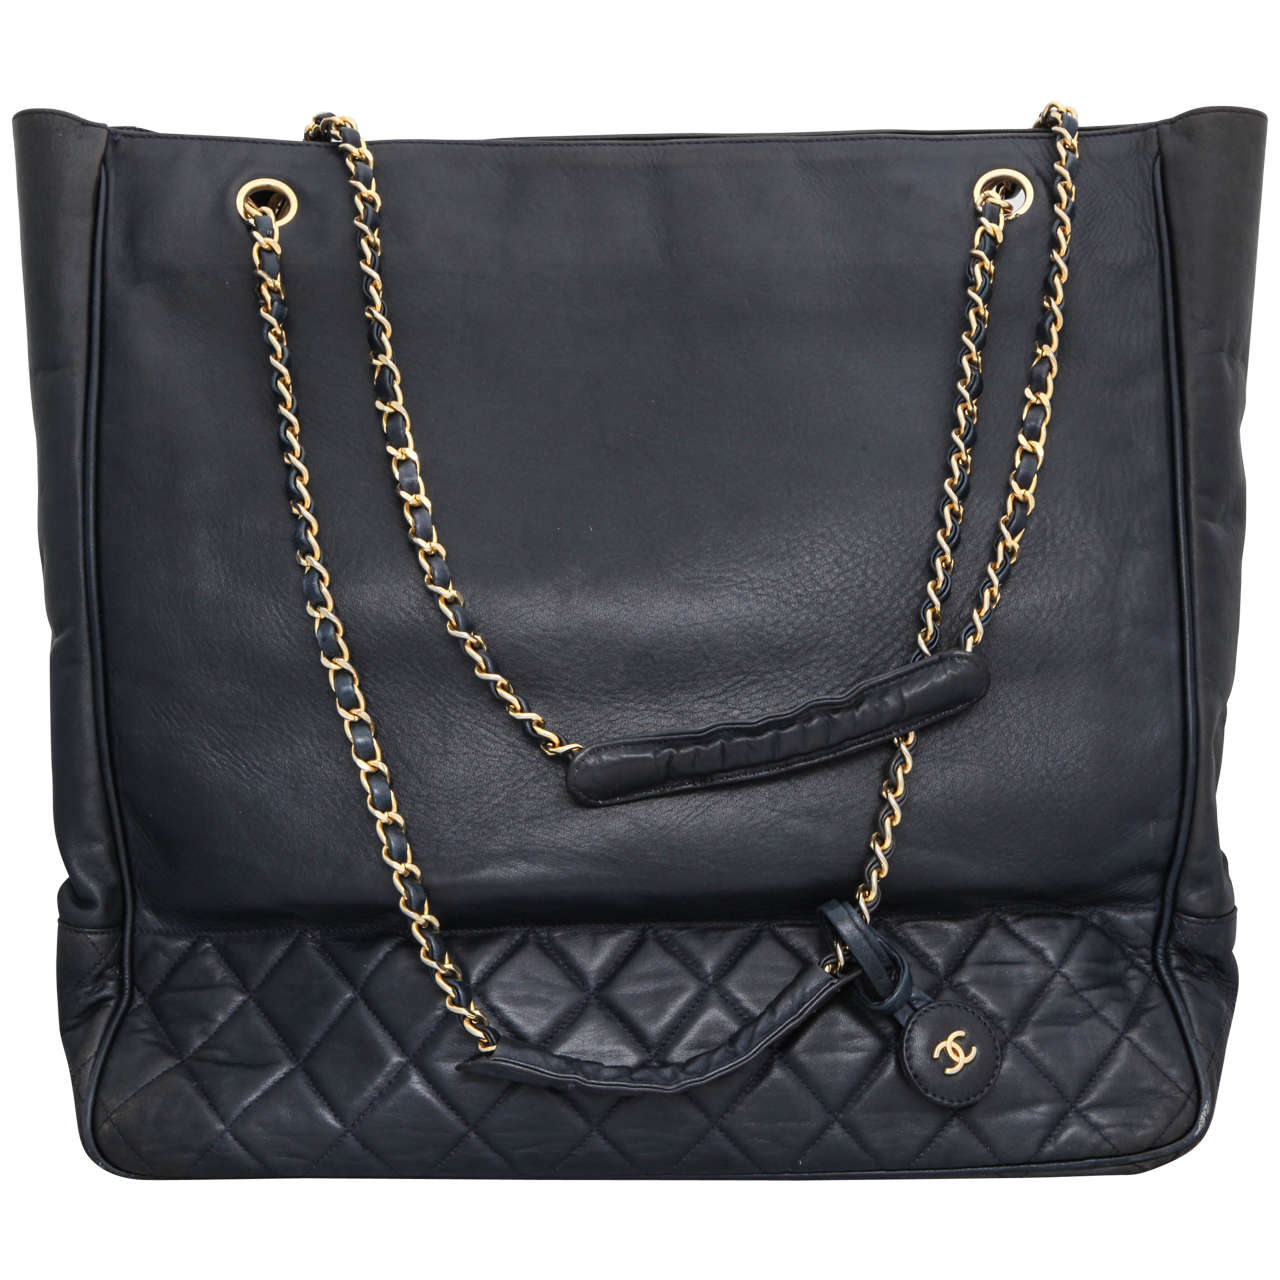 Chanel Navy Tote Bag With CC And Quilted Details at 1stdibs